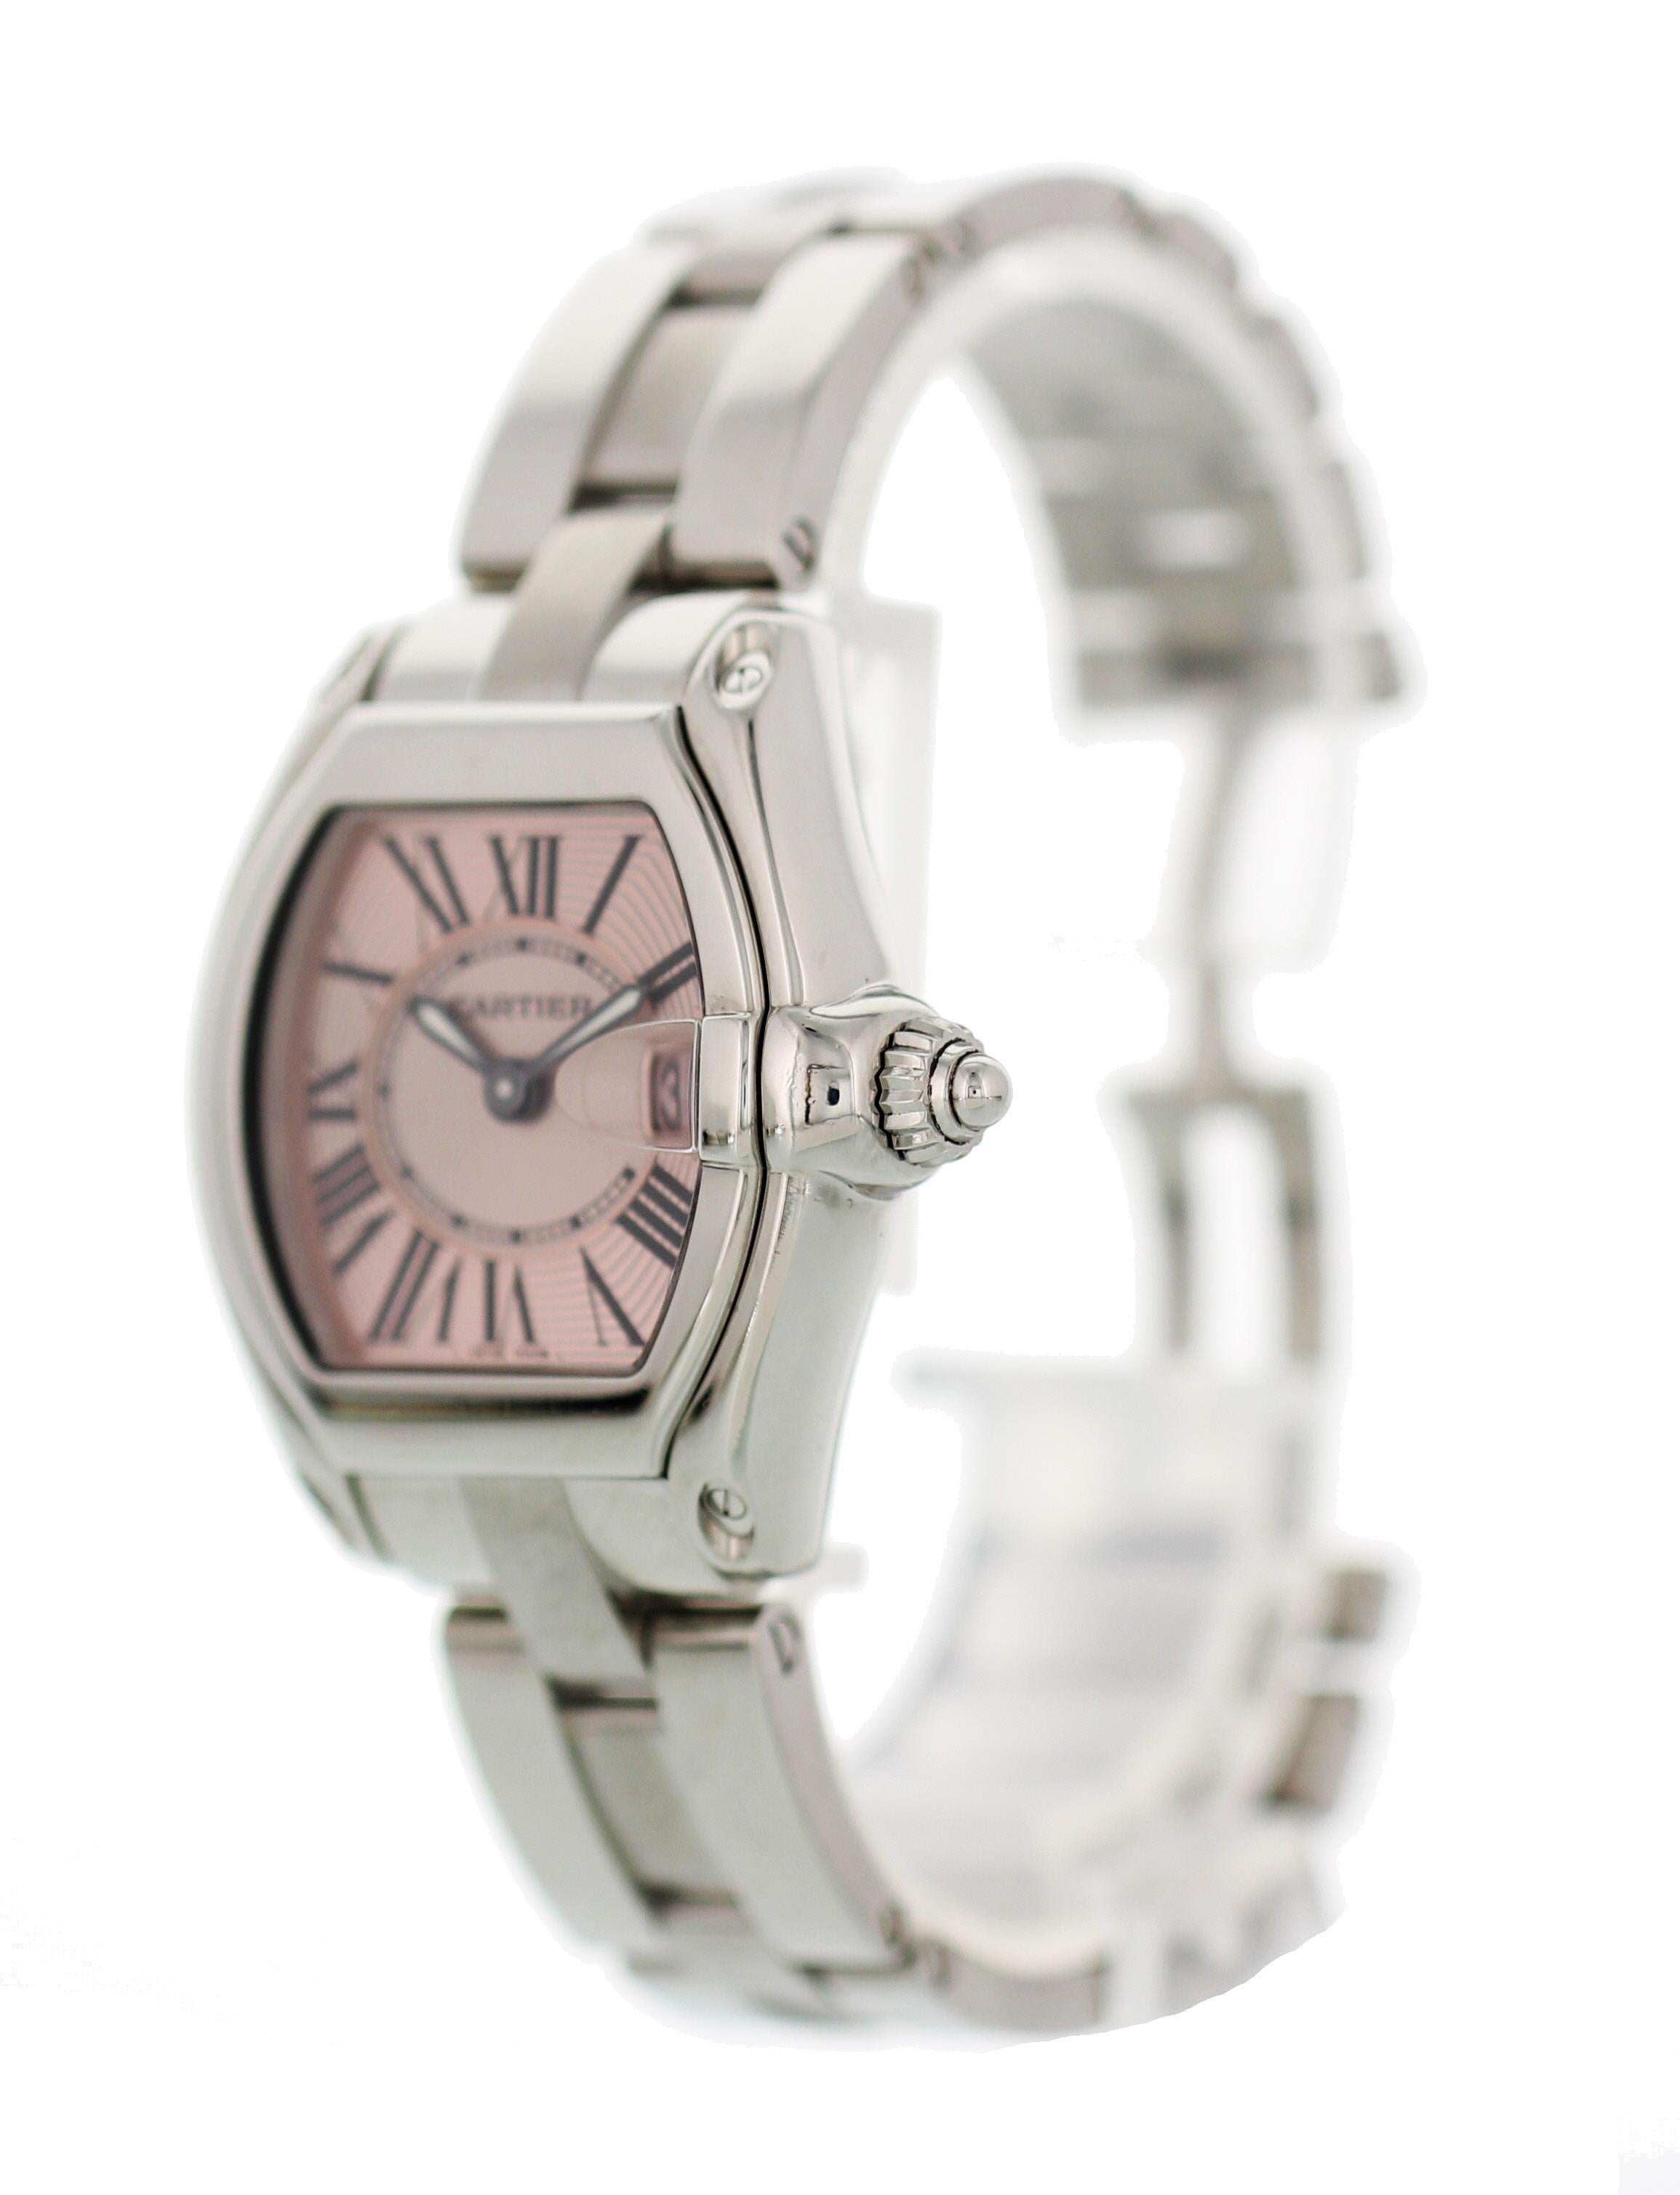 Ladies Cartier Roadster. 32 x 36 mm stainless steel case. Pink dial with luminous hands and black Roman numeral markers. Date display at the 3 o'clock. Stainless steel band with a hidden butterfly clasp. Quartz battery movement. Sapphire crystal